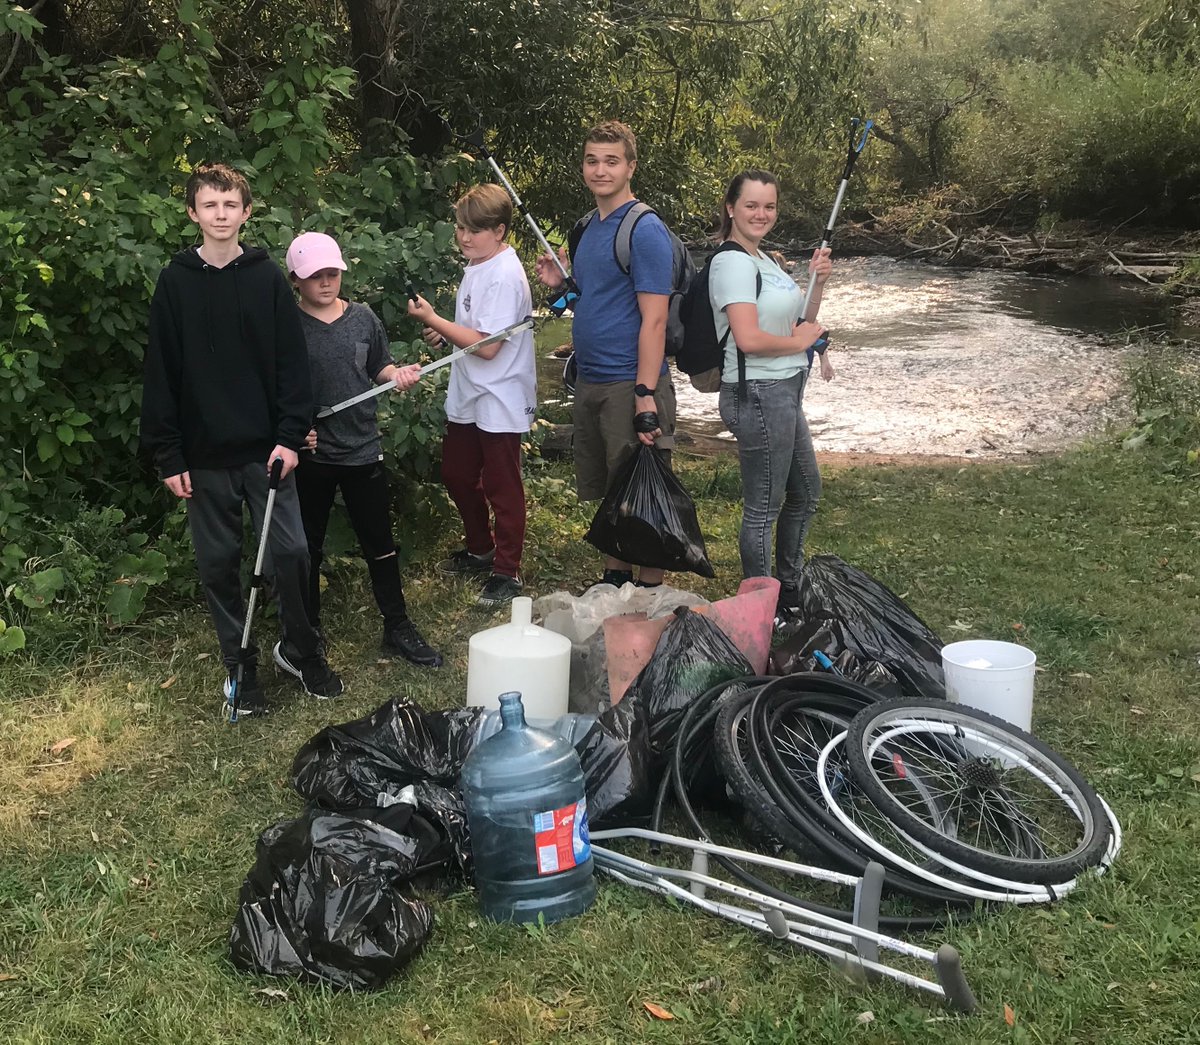 AIAO Wetland cleanup crew! A never-ending pursuit, but our students enjoyed being able to clean up a space where we play and learn often! 

🌿🌎
#SD22 #inquirylearning #wetlands #outdooreducation #adventureeducation